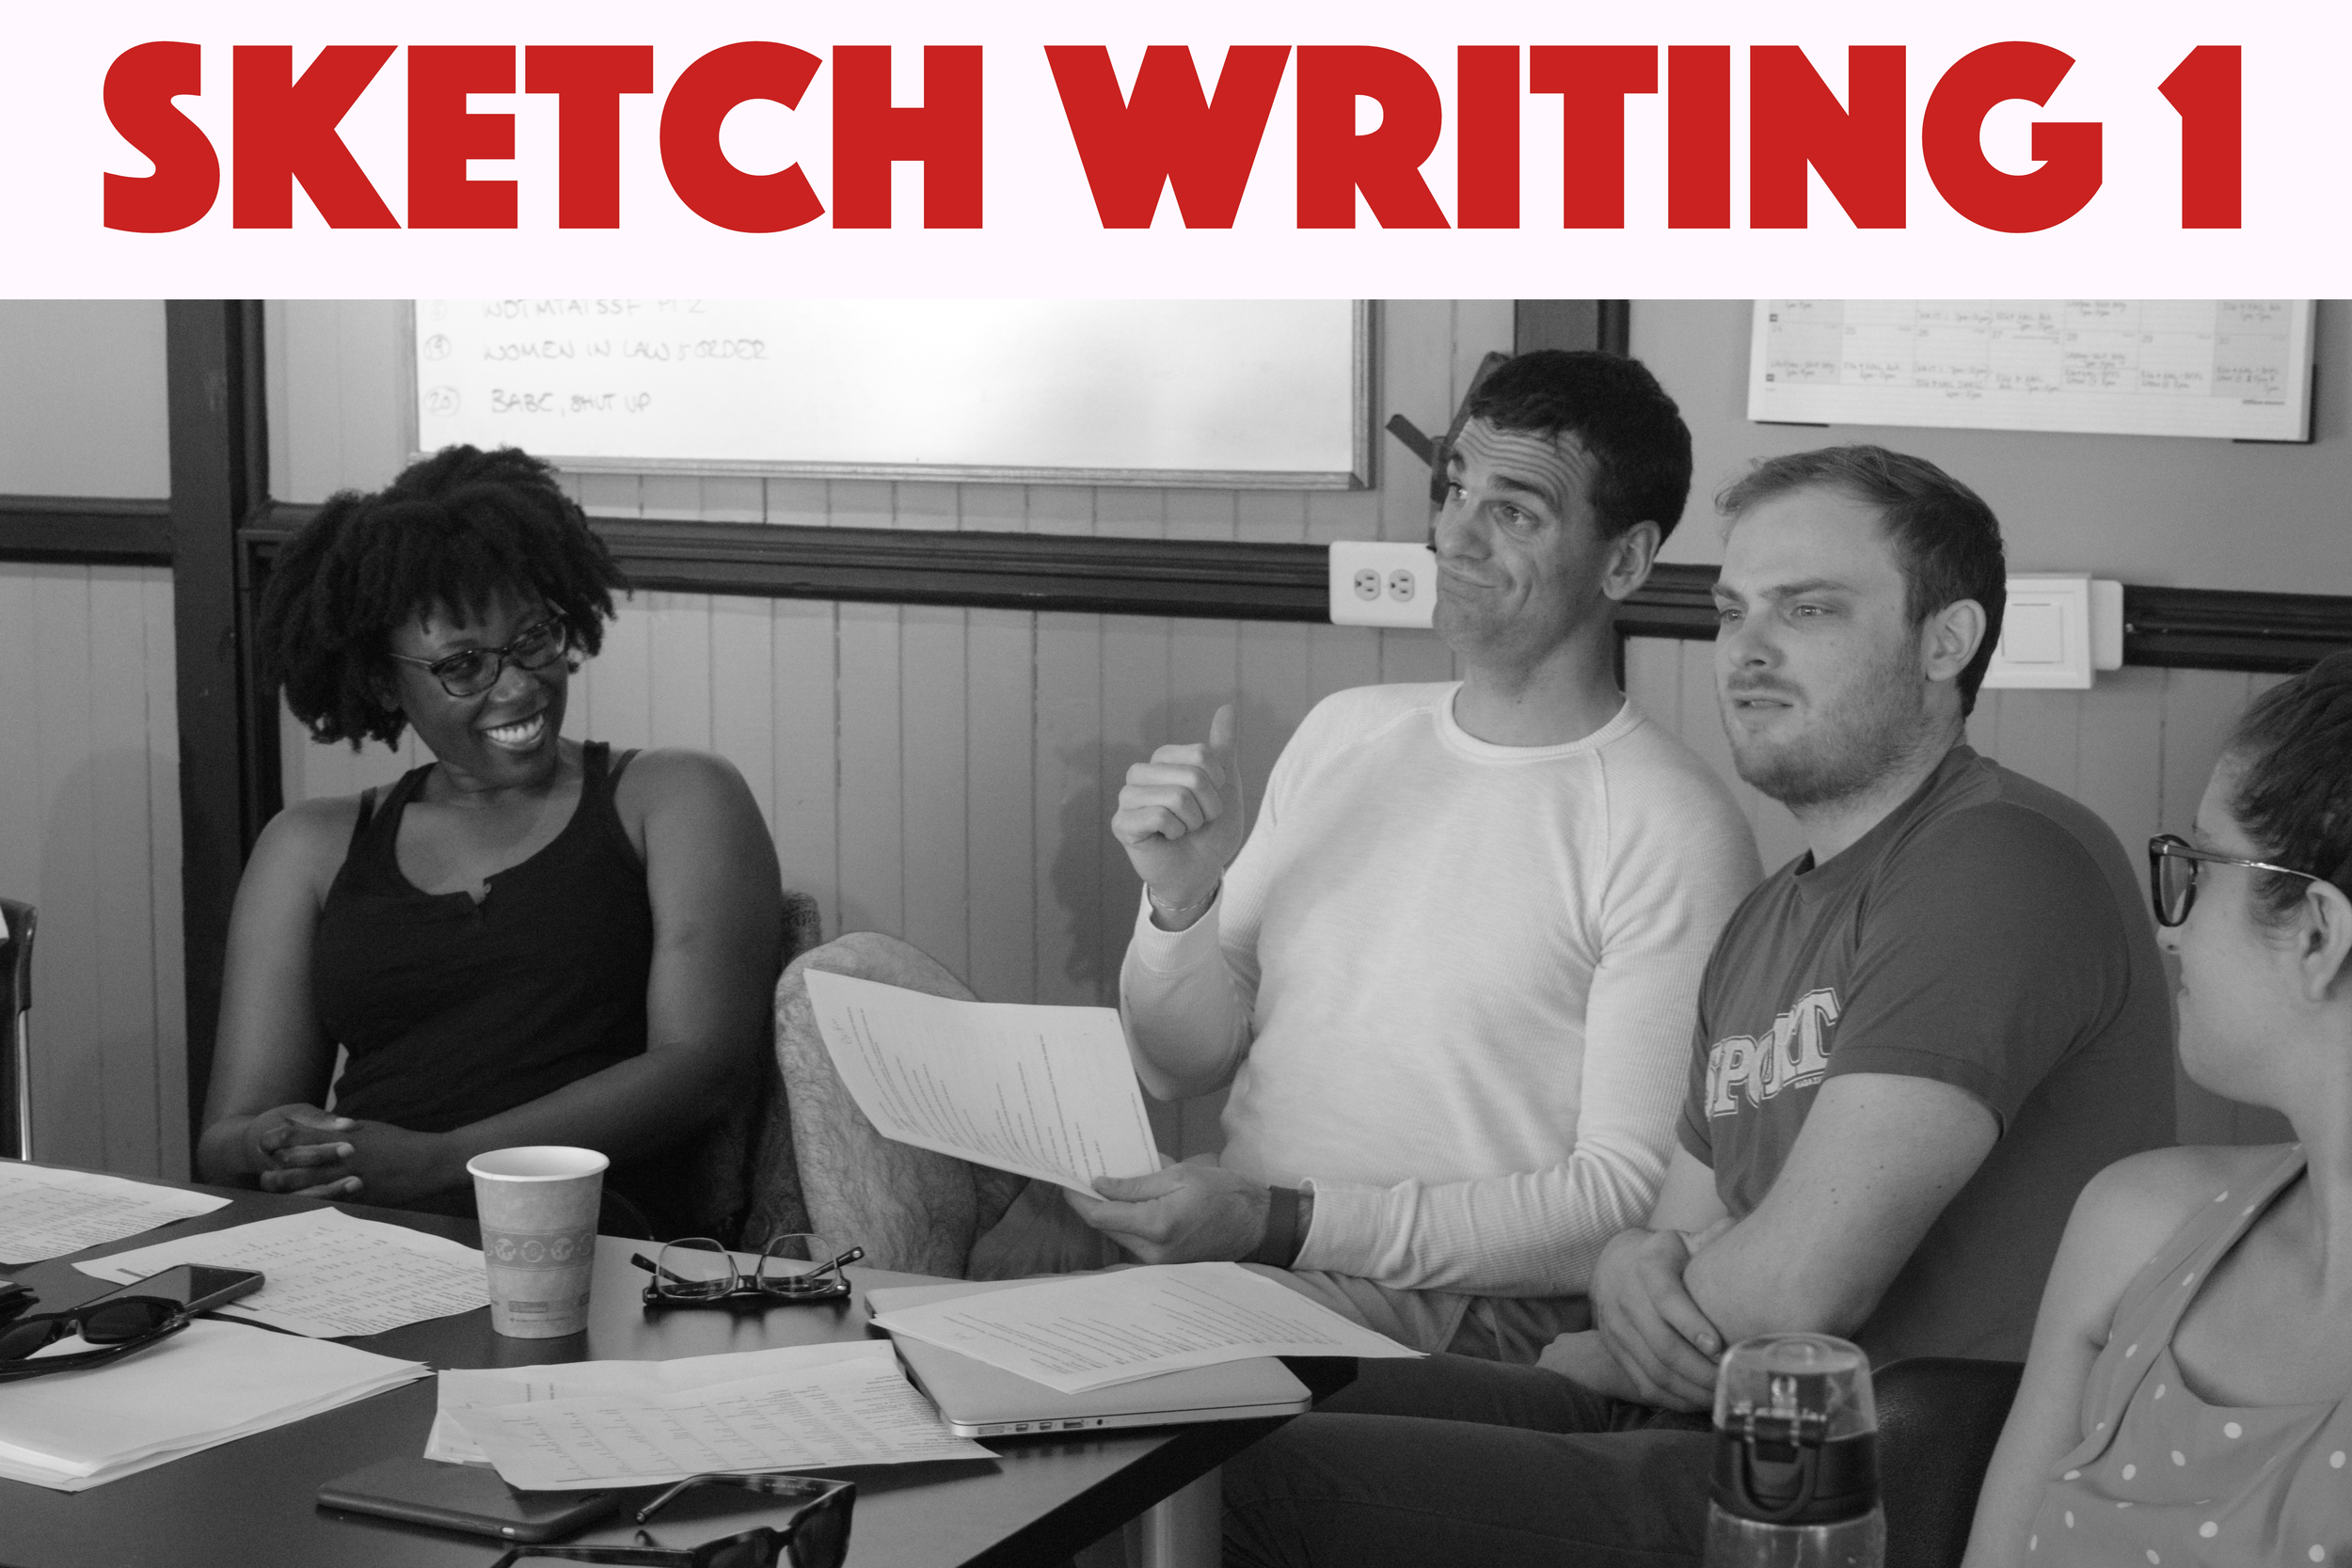 Aggregate more than 180 sketch writing classes super hot